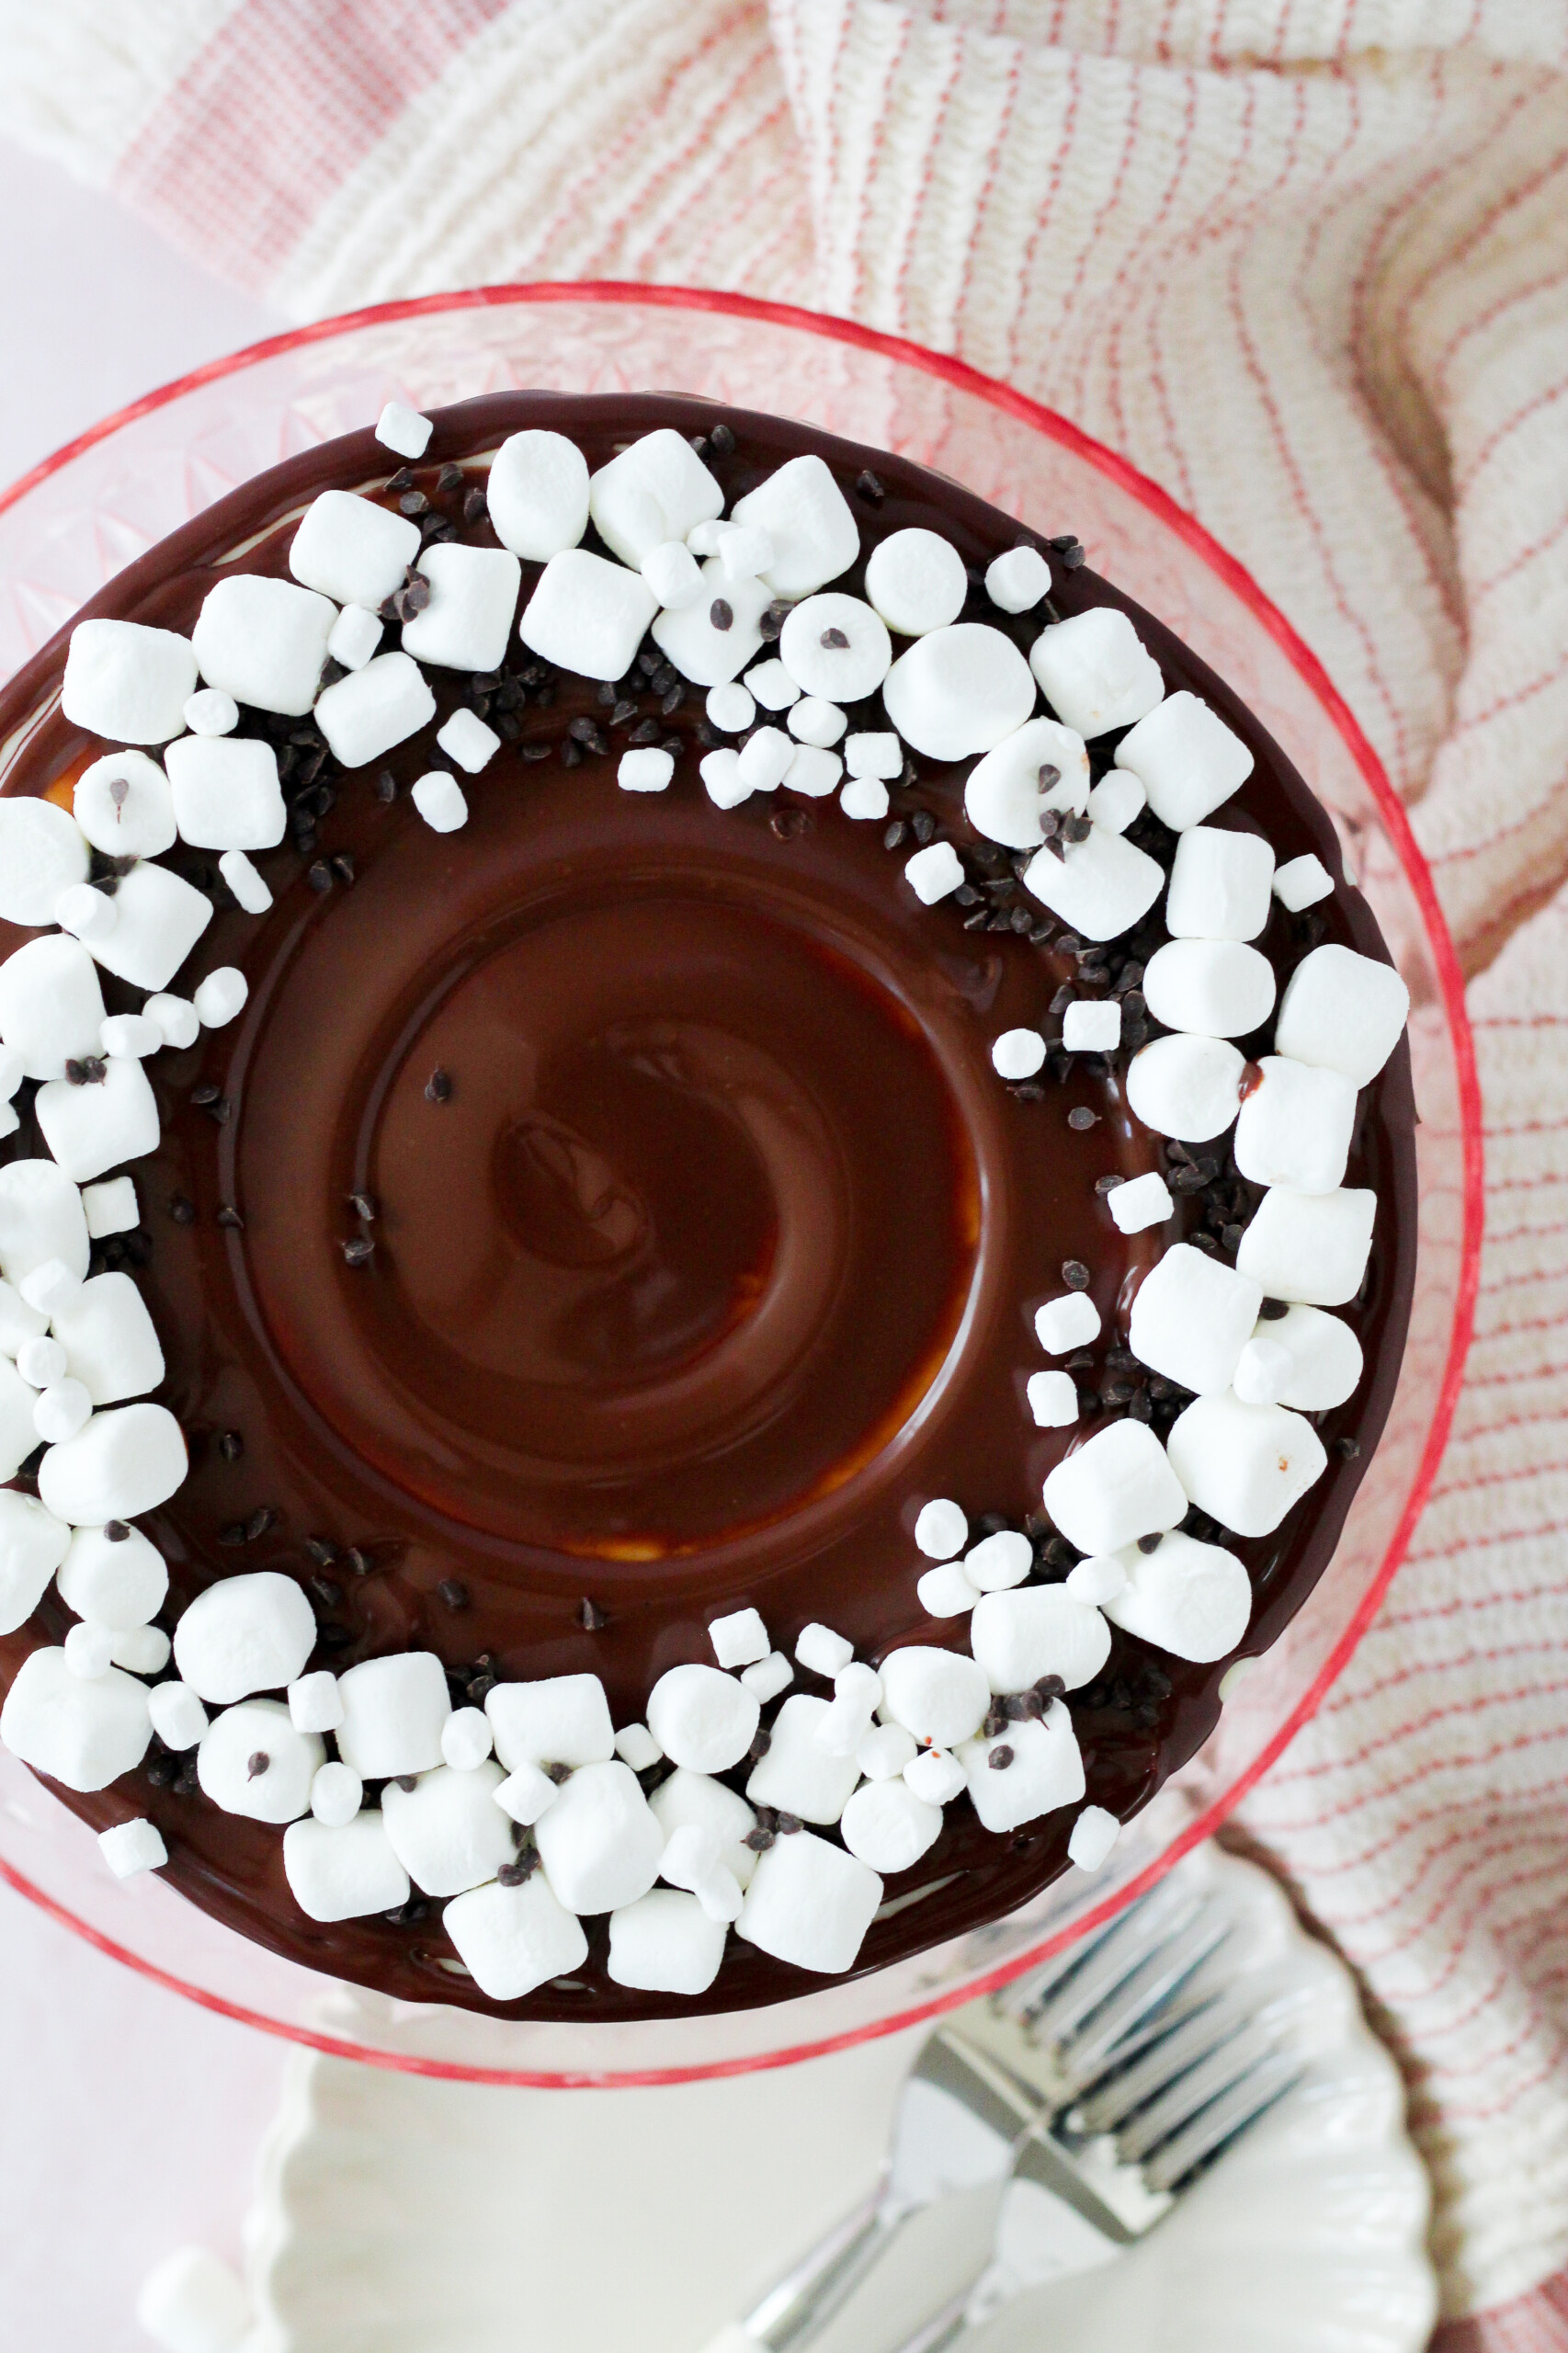 Top view of a cake with chocolate ganache and marshmallows on top.